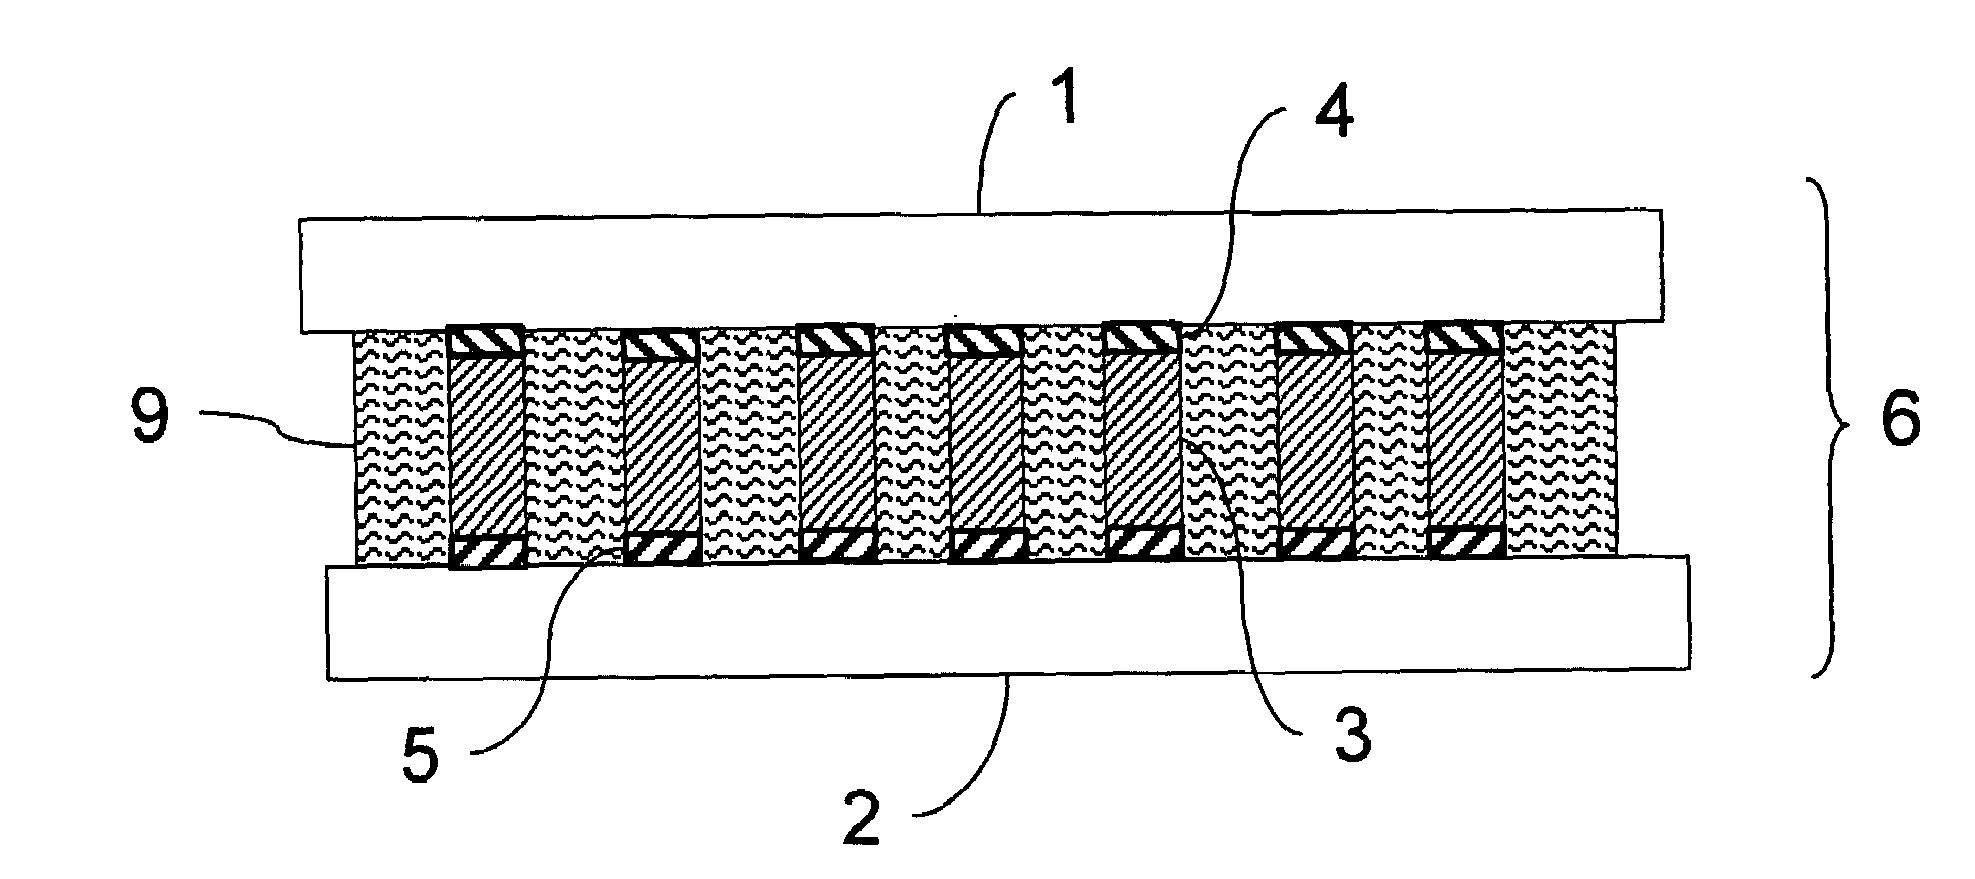 Method of fabricating an interconnection for chip sandwich arrangements